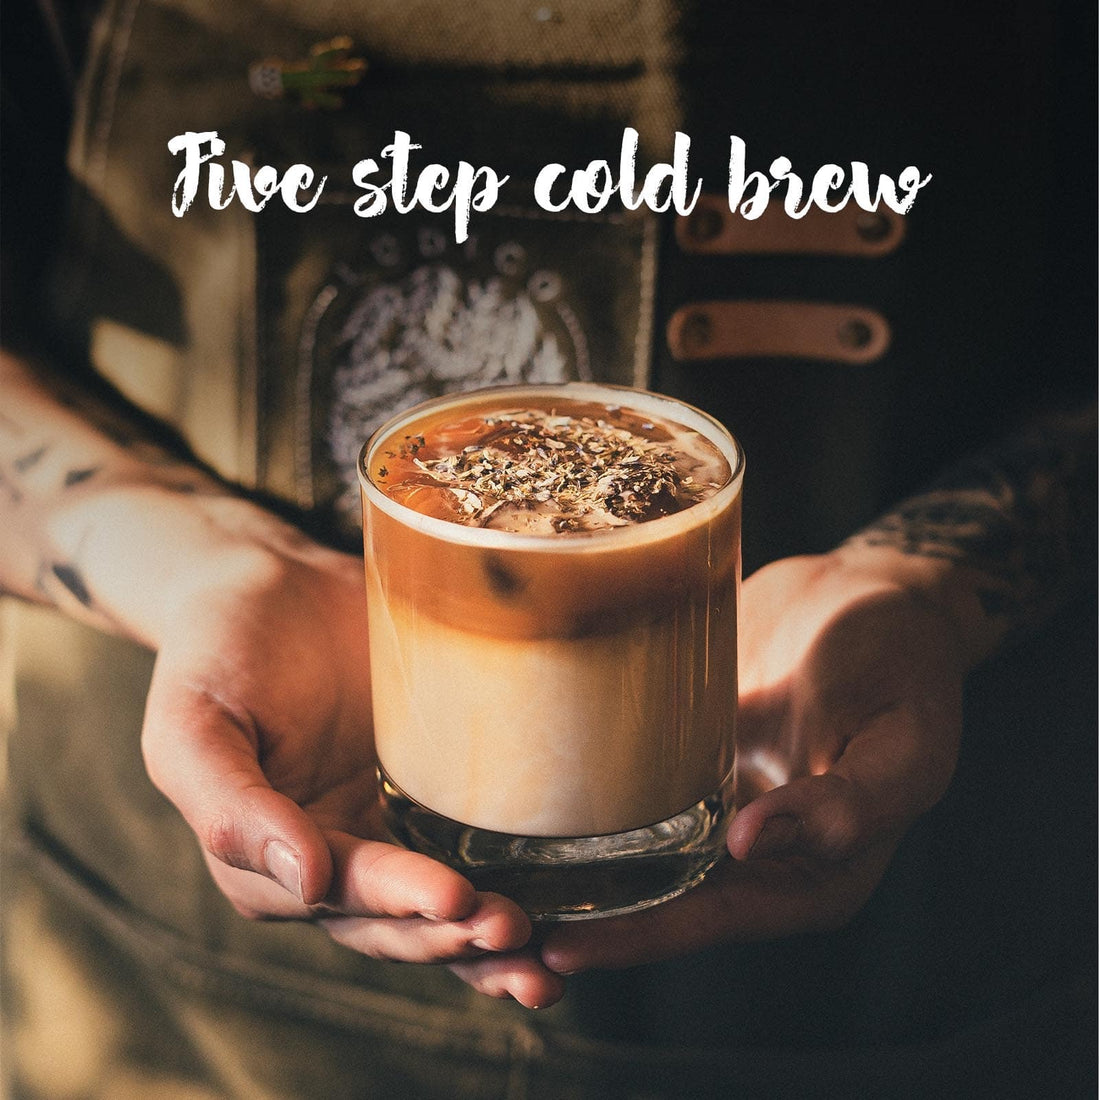 5-Step Cold Brew to rule this summer